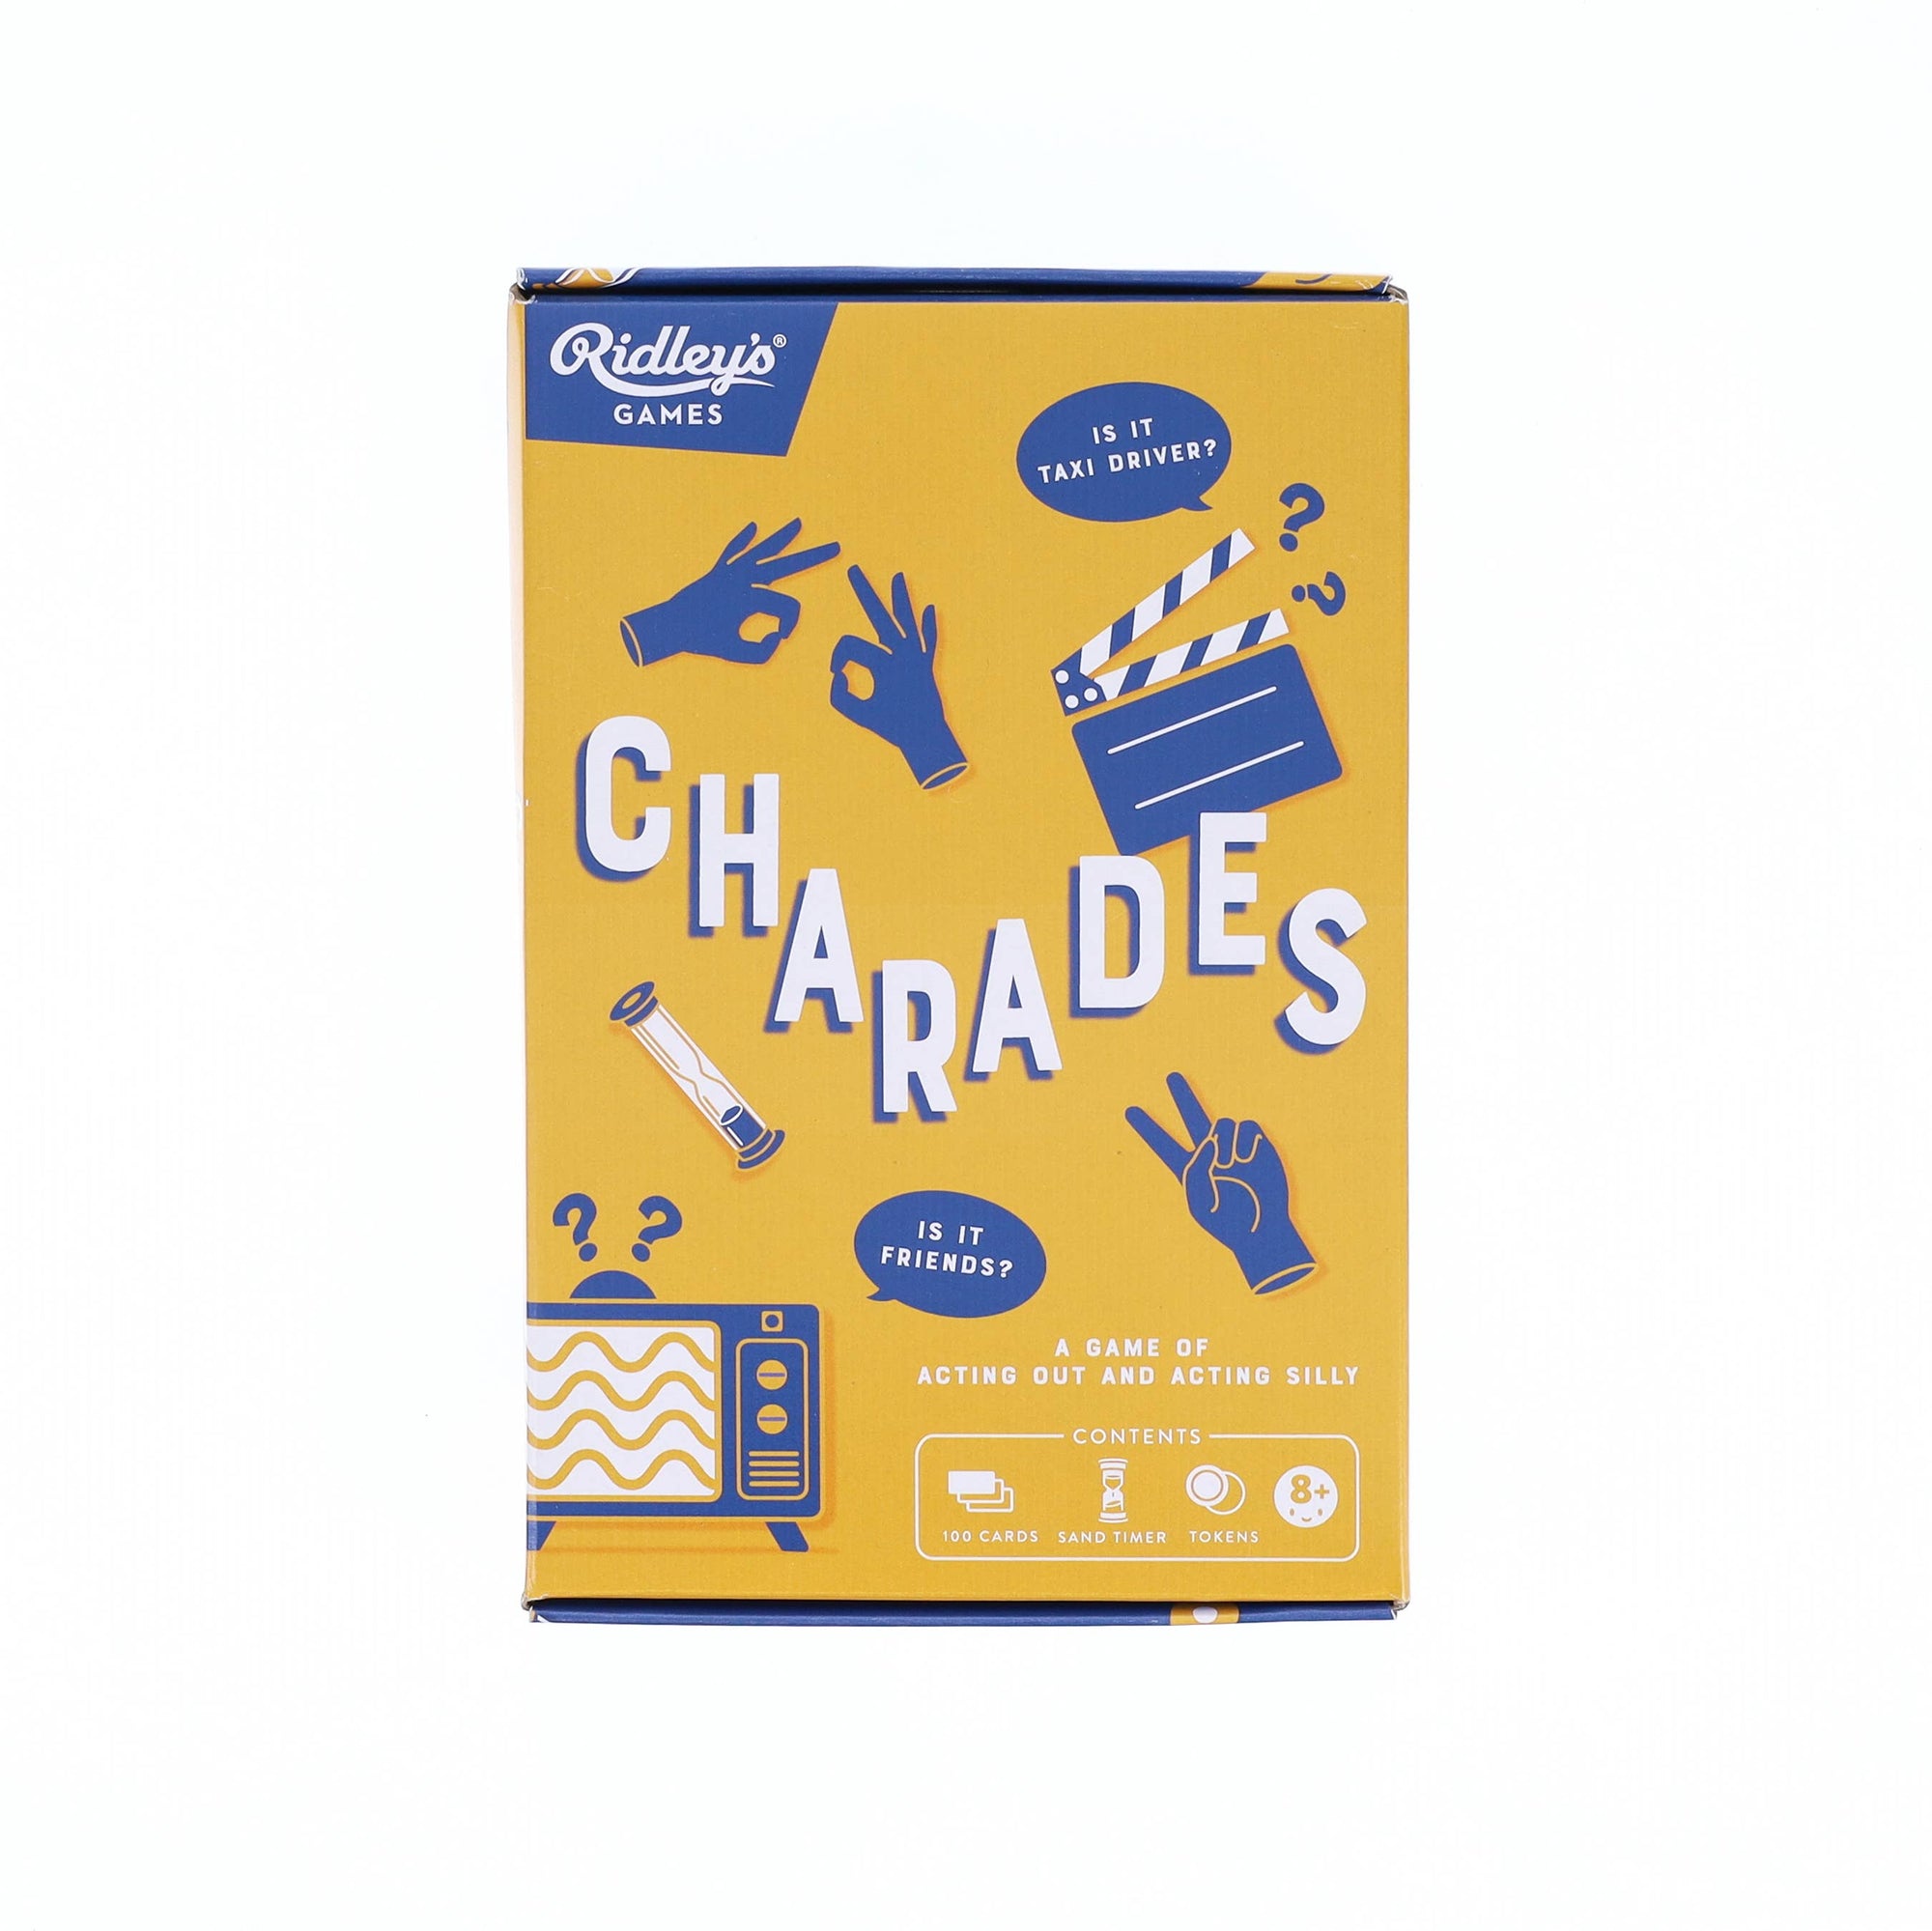 A box of Charades game with text, images, and a Charades twist.